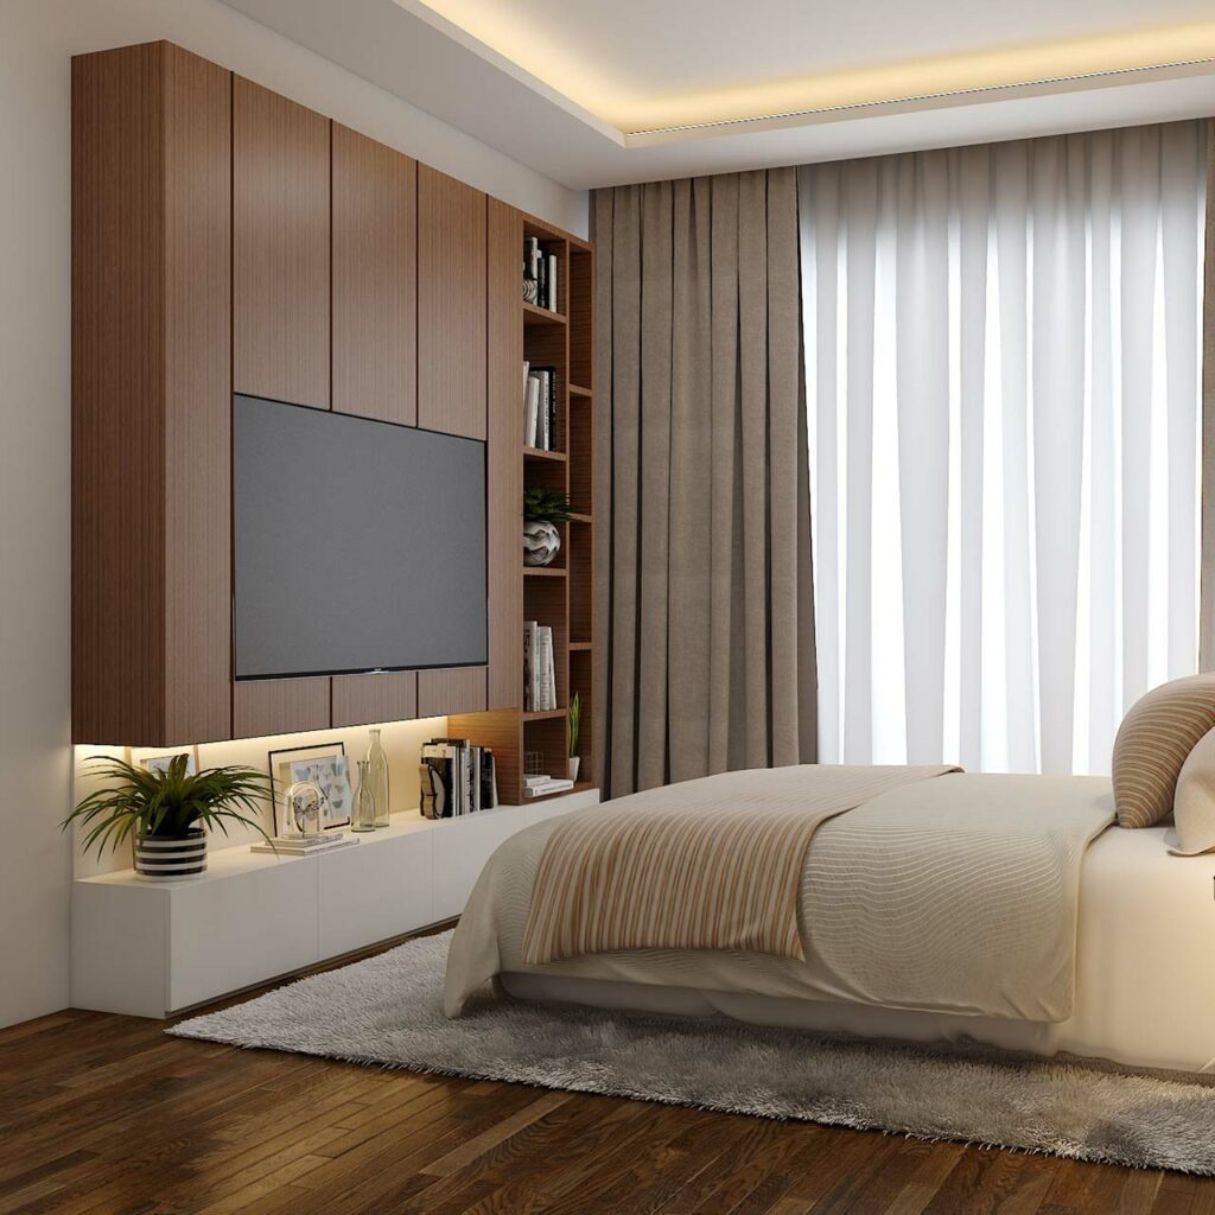 Bedroom TV Ideas: 10 Tips For Styling A Television